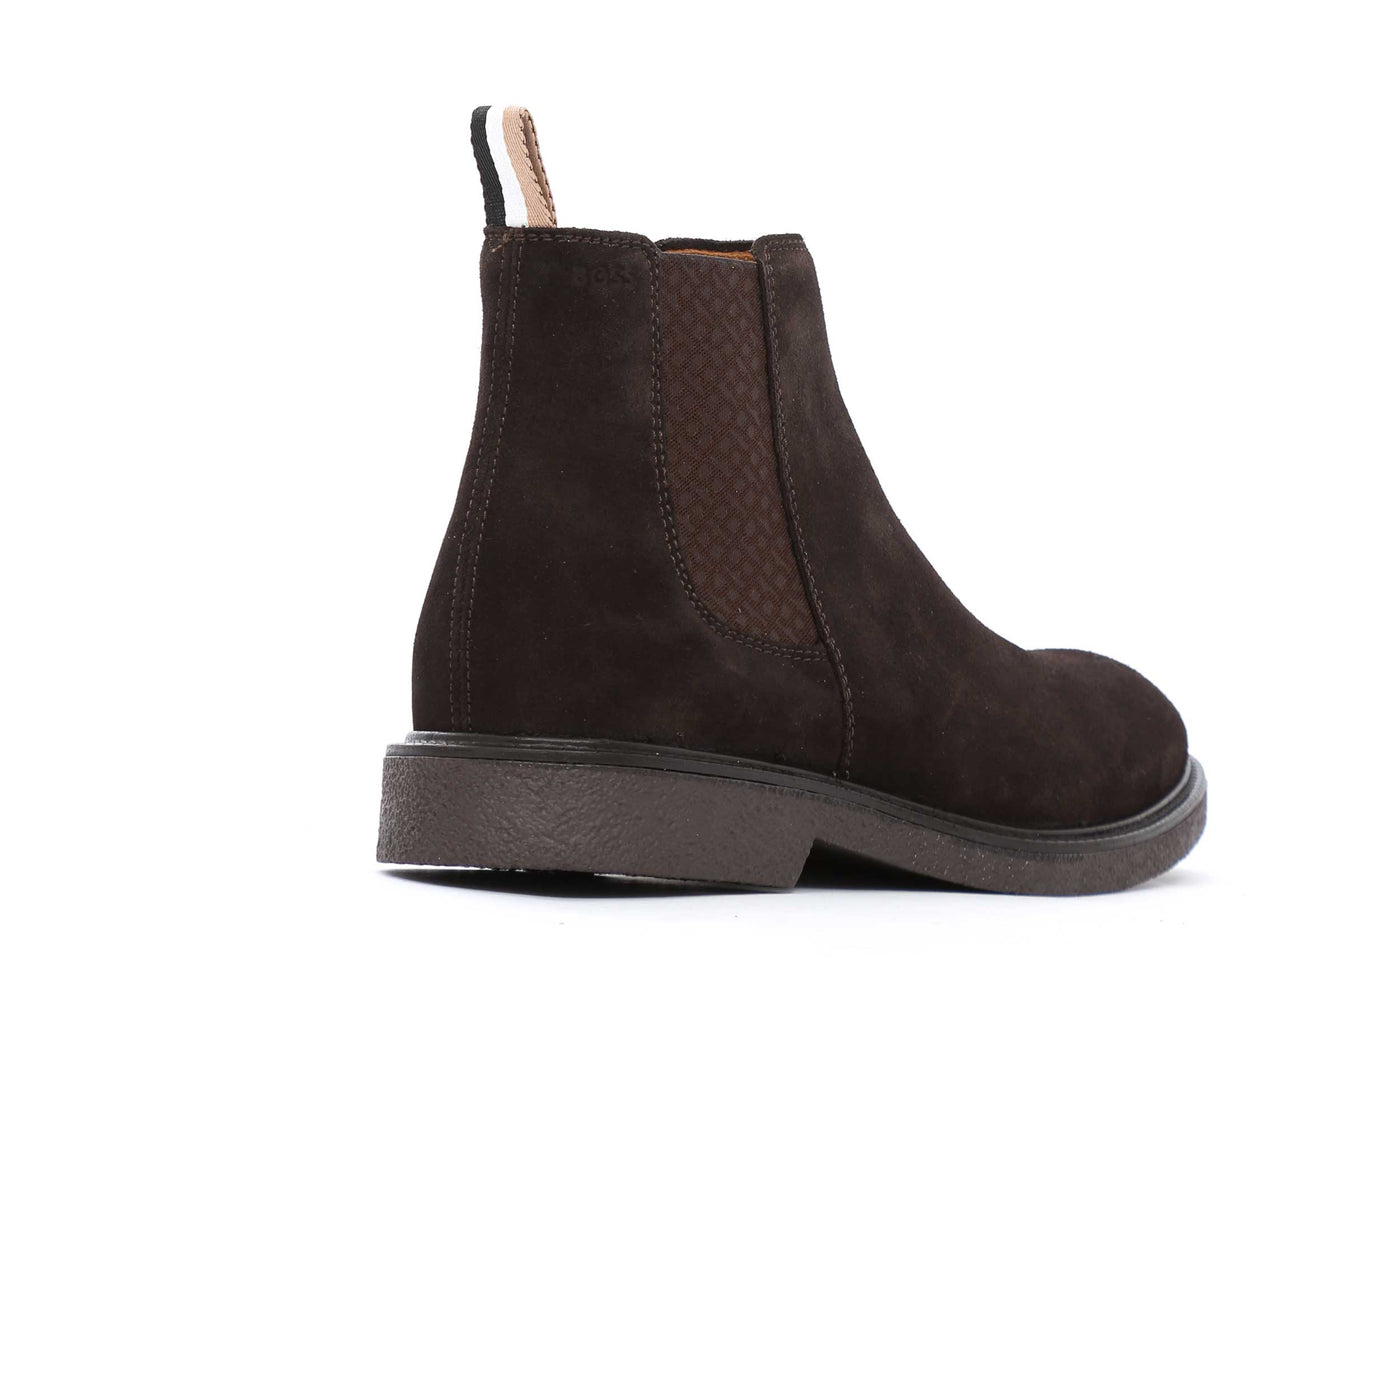 BOSS Tunley Cheb sdmo Boot in Brown